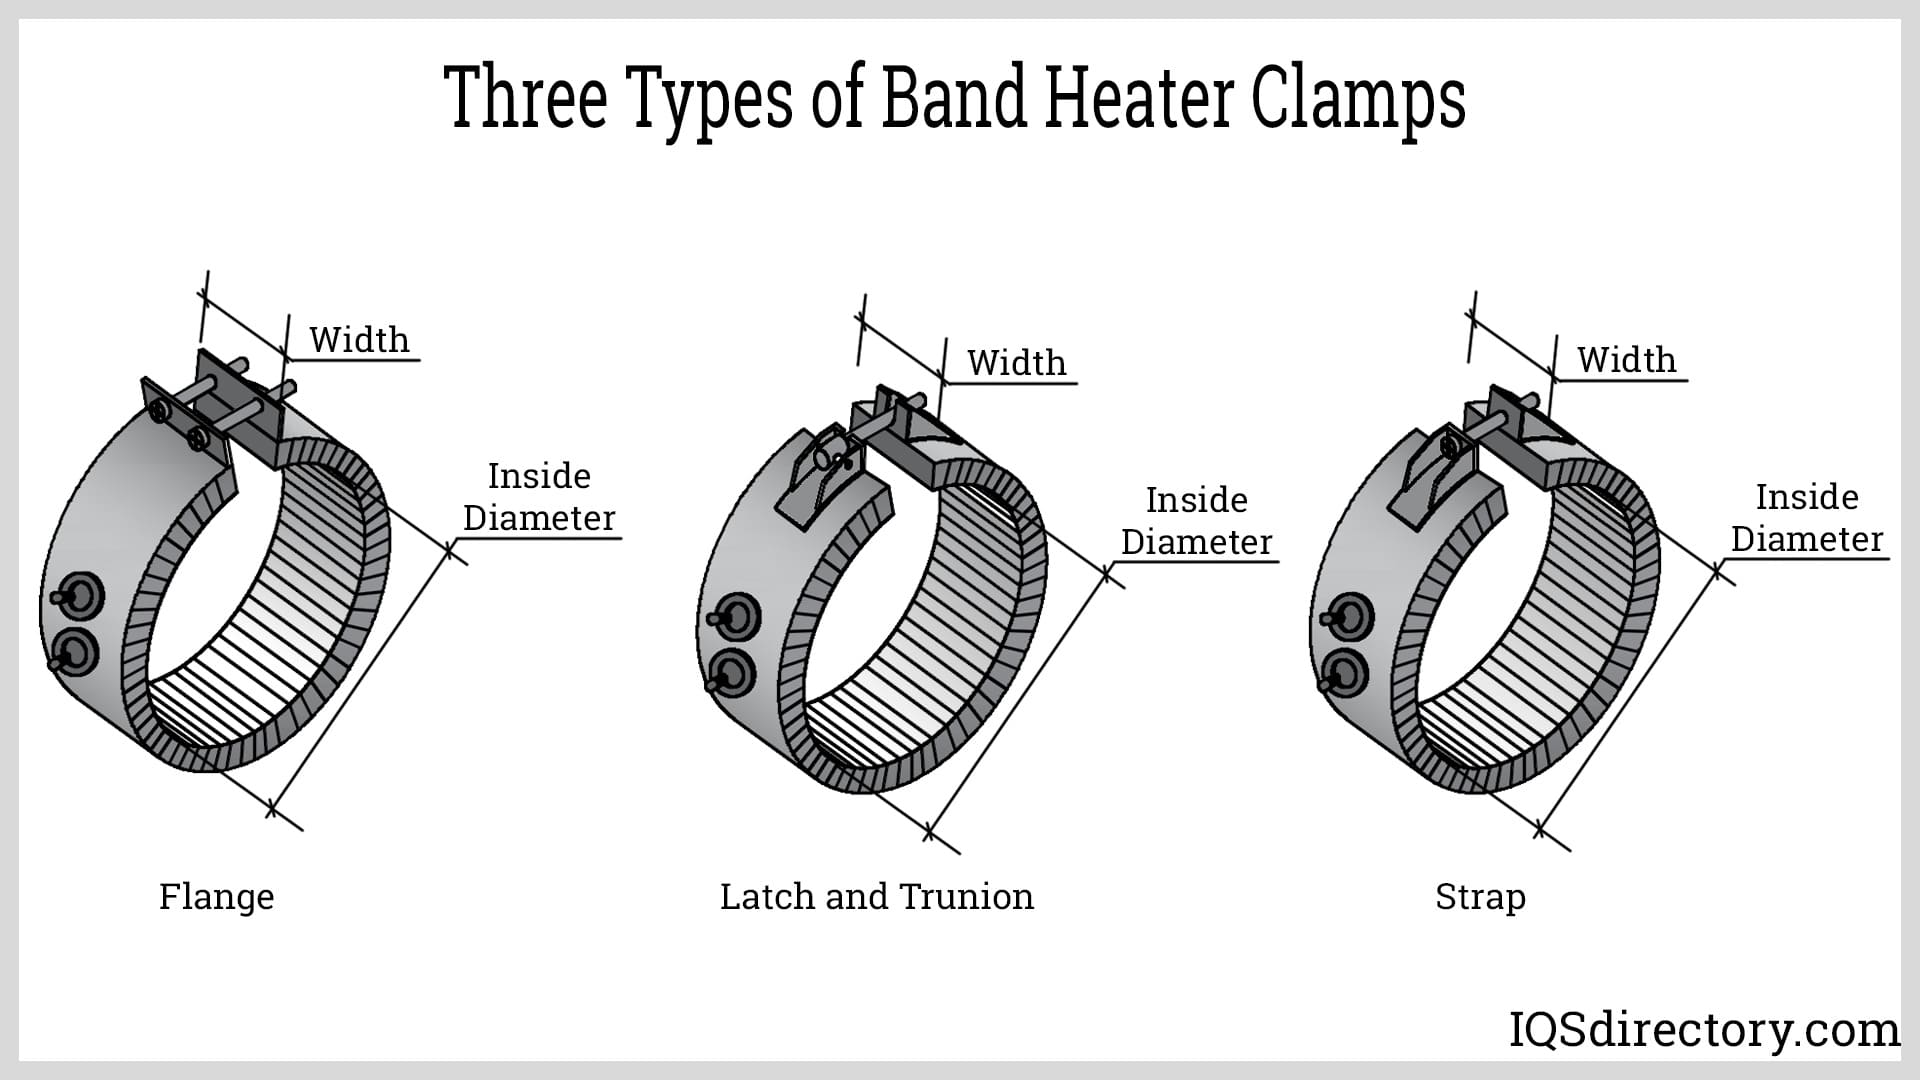 Three Types of Band Heater Clamps